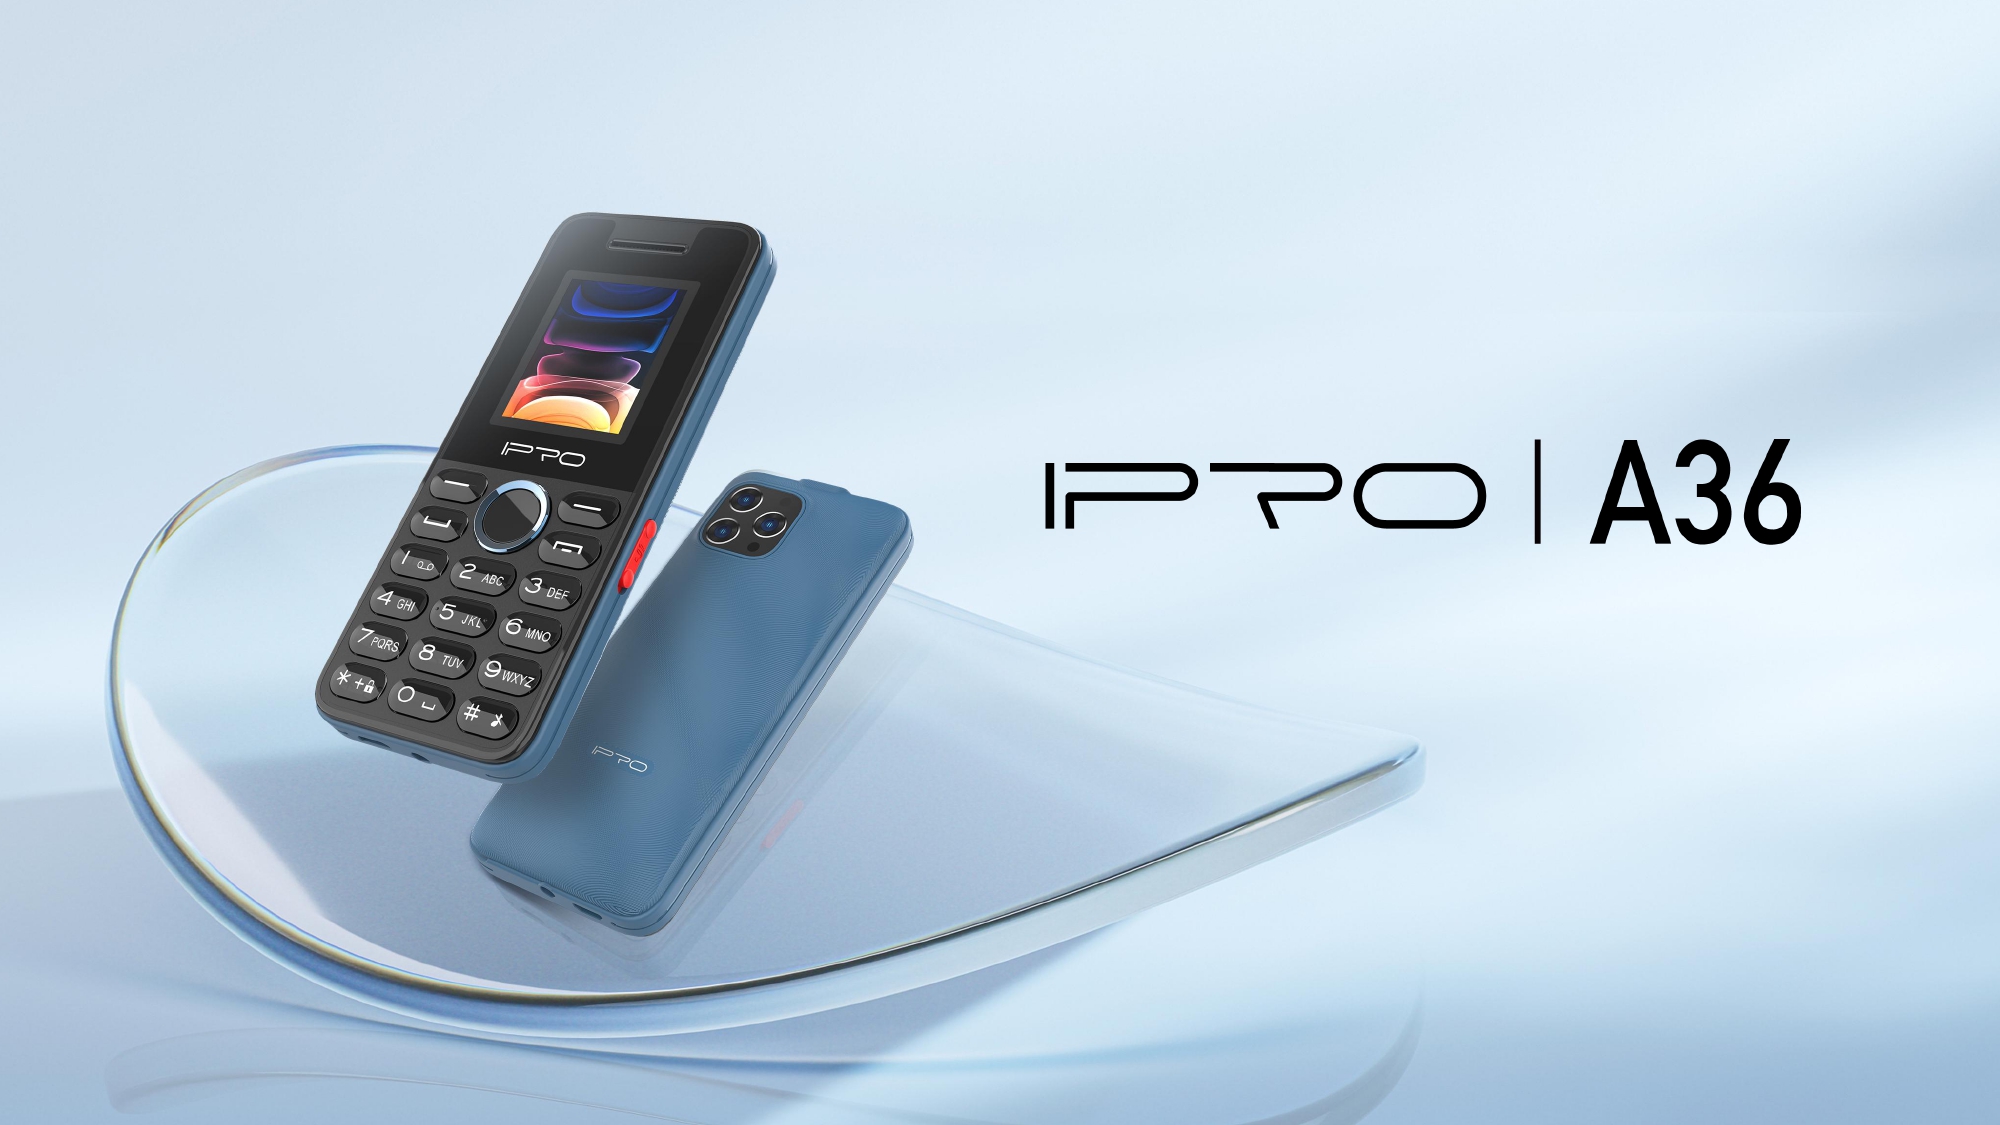 IPRO A36 3 SIM card while standby GSM 2G Mini phone 1.77 inch screen 1800mAh battery 0.3MP feature phone